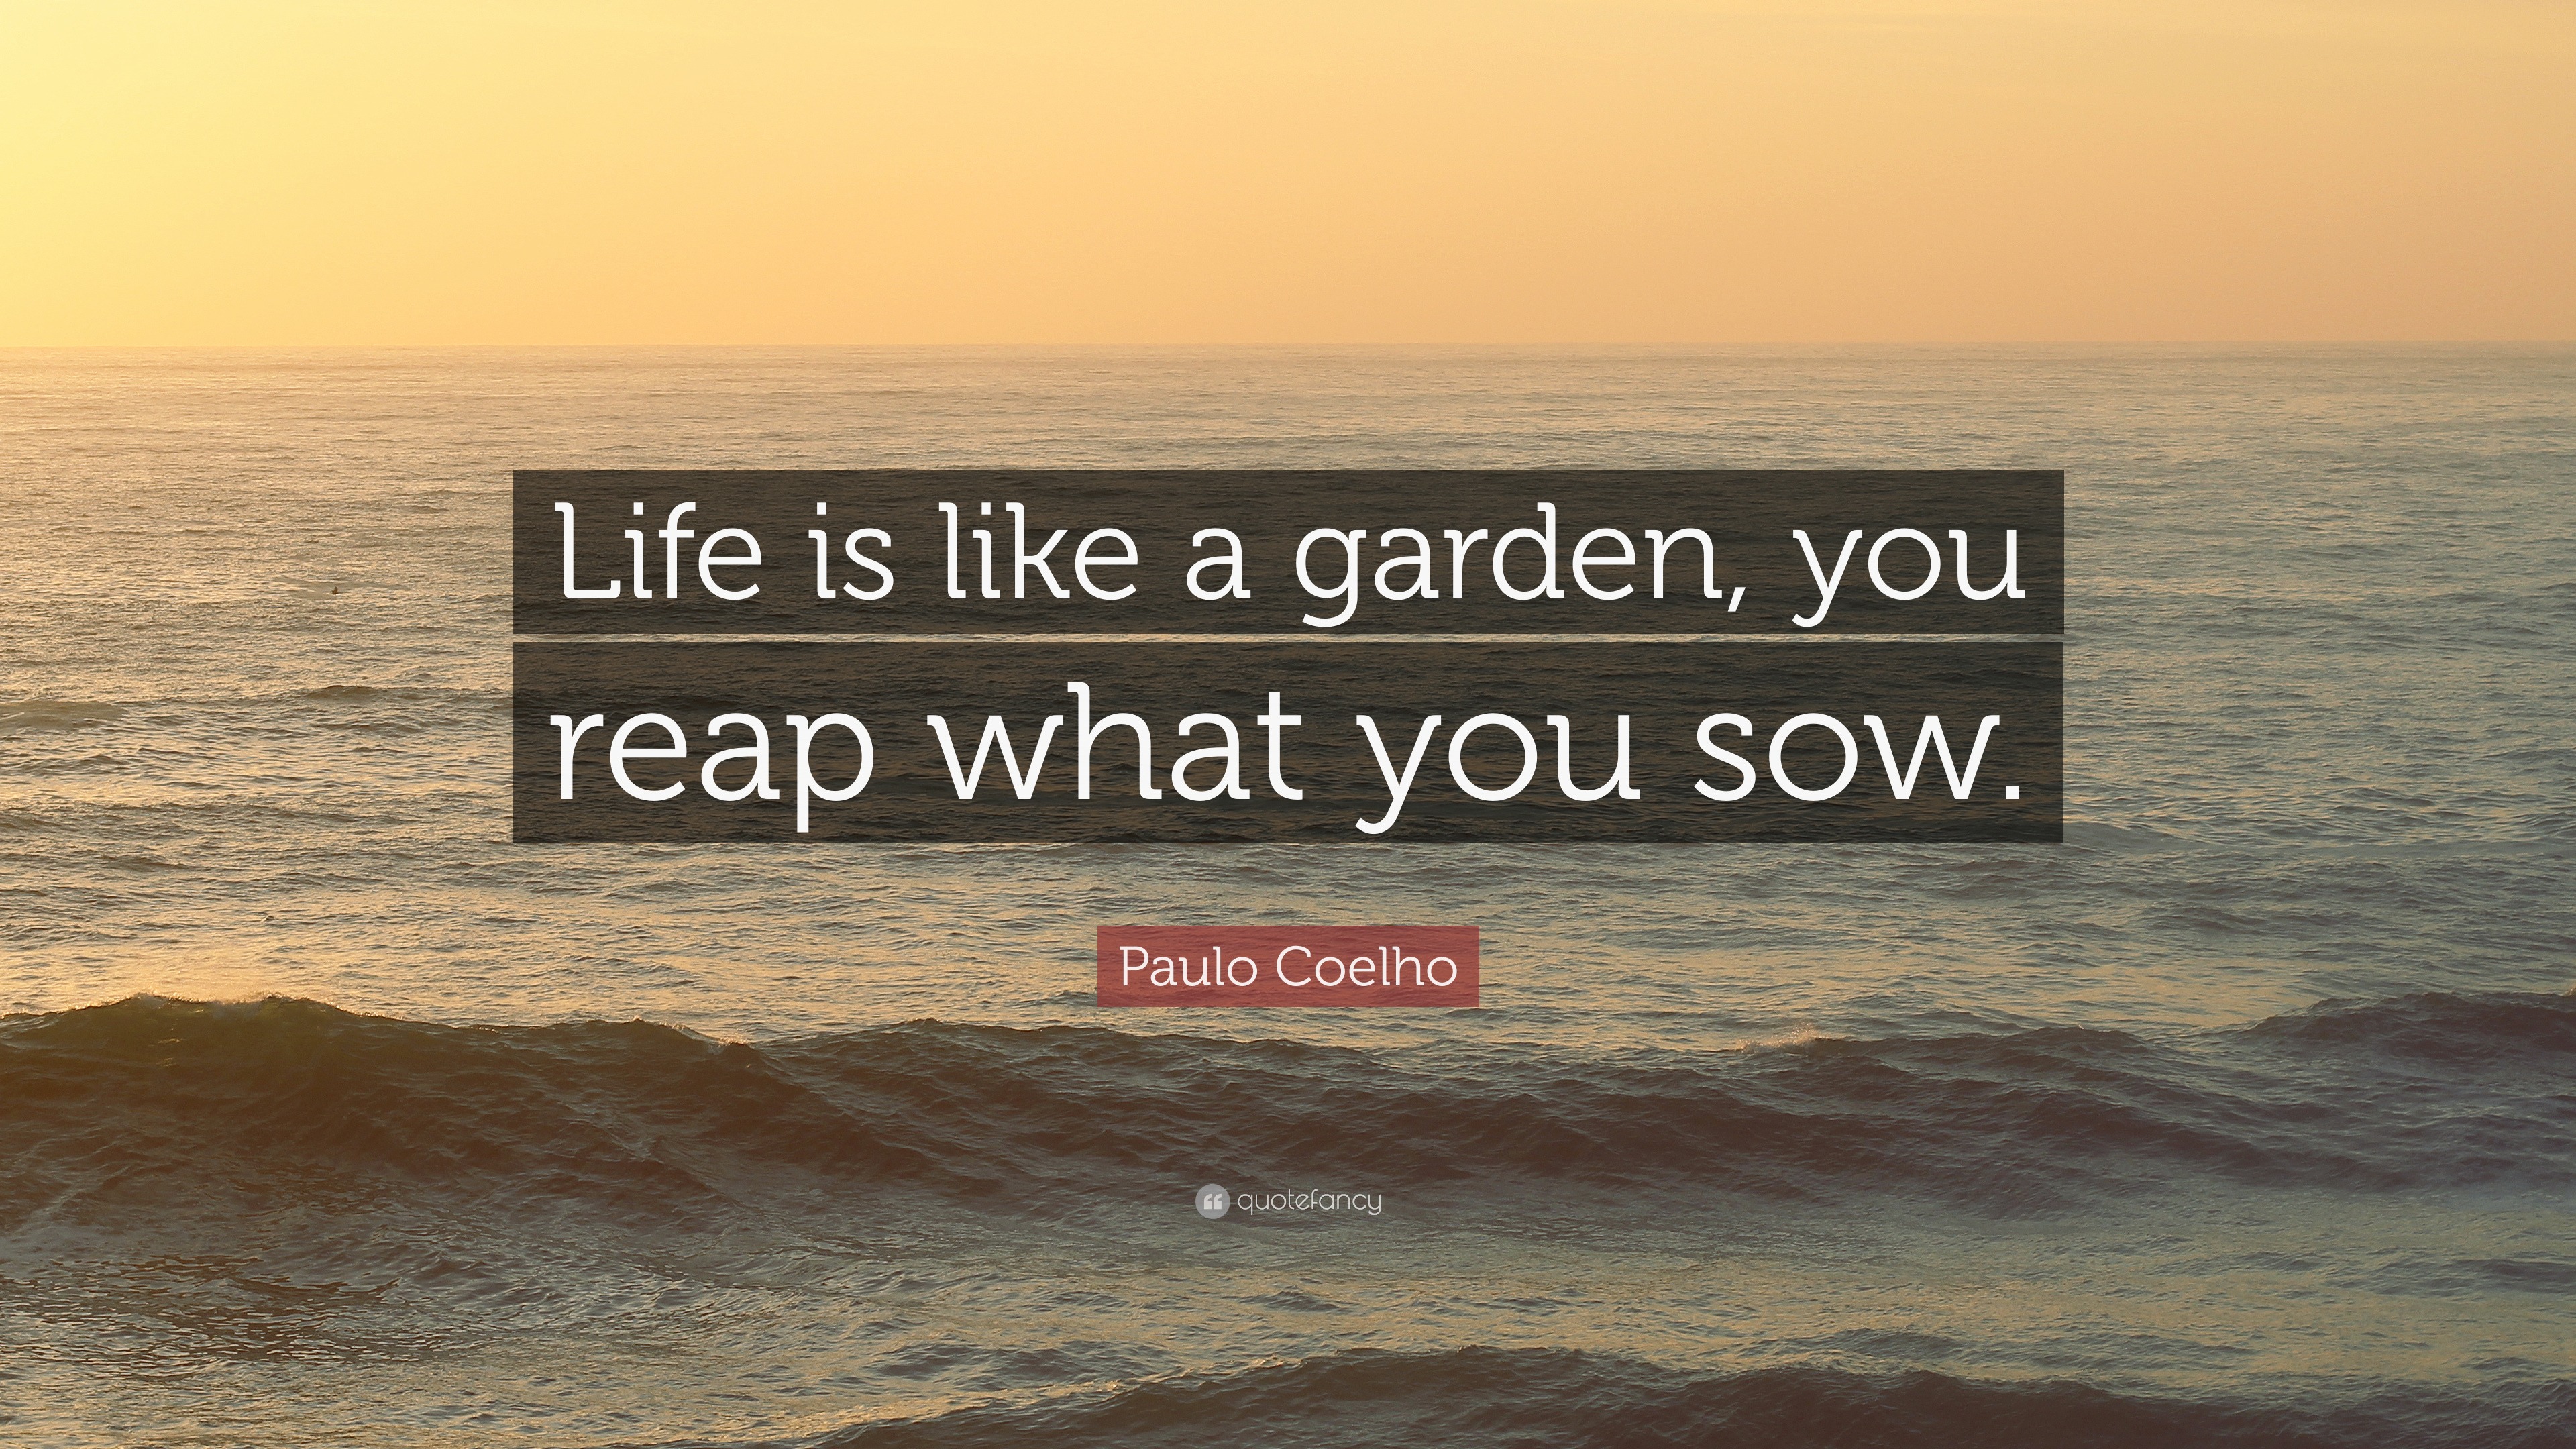 Paulo Coelho Quote “Life is like a garden, you reap what you sow.” (7